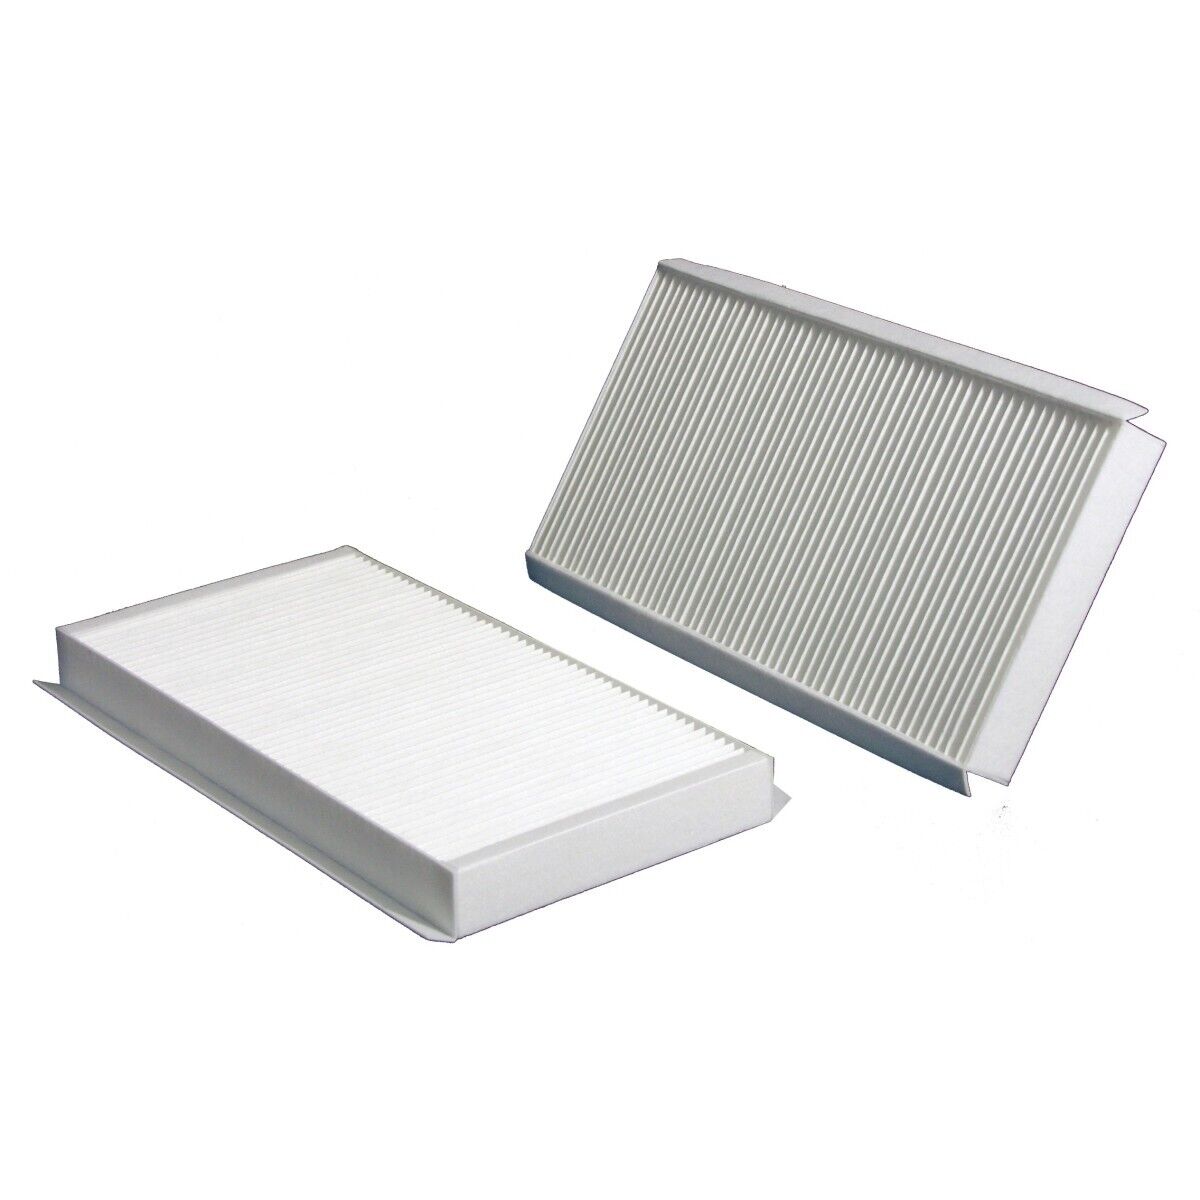 24472 WIX Cabin Air Filter for Saab 9-3 9-3X 9-4X 2011